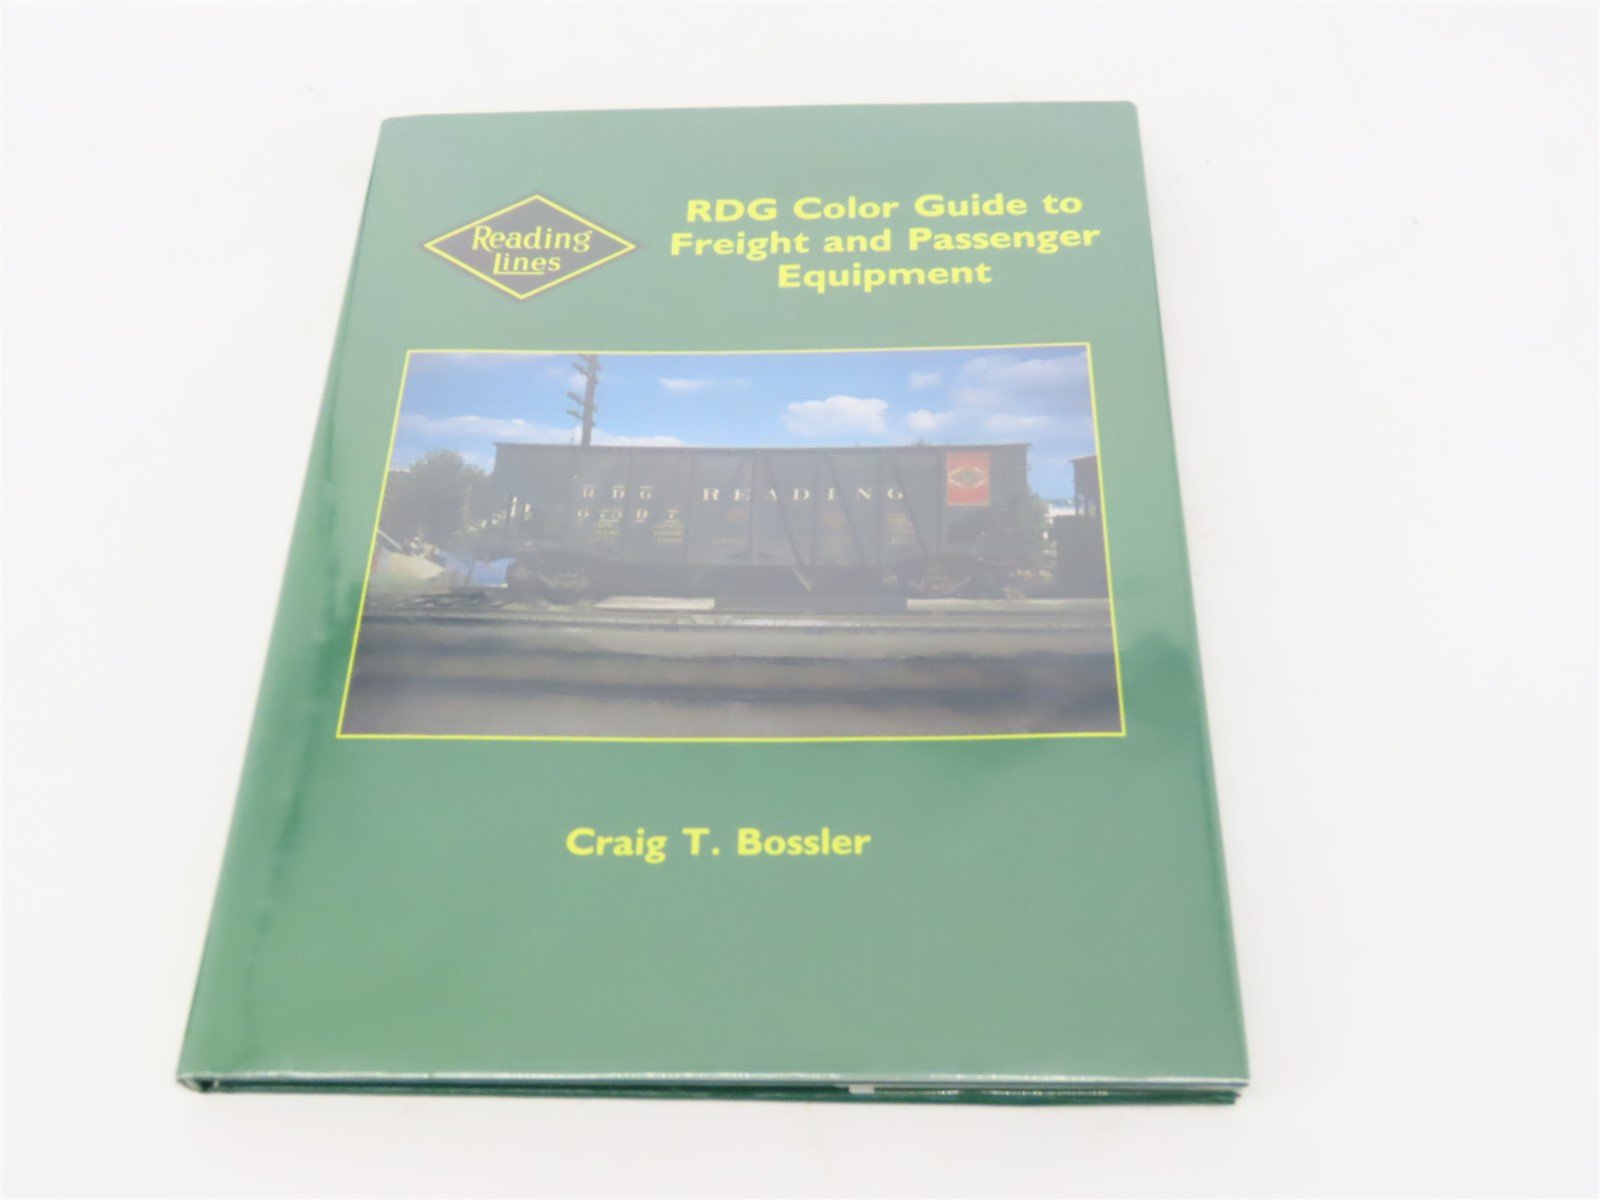 Morning Sun: RDG Color Guide to Freight & Passenger Equip. by Craig T. Bossler